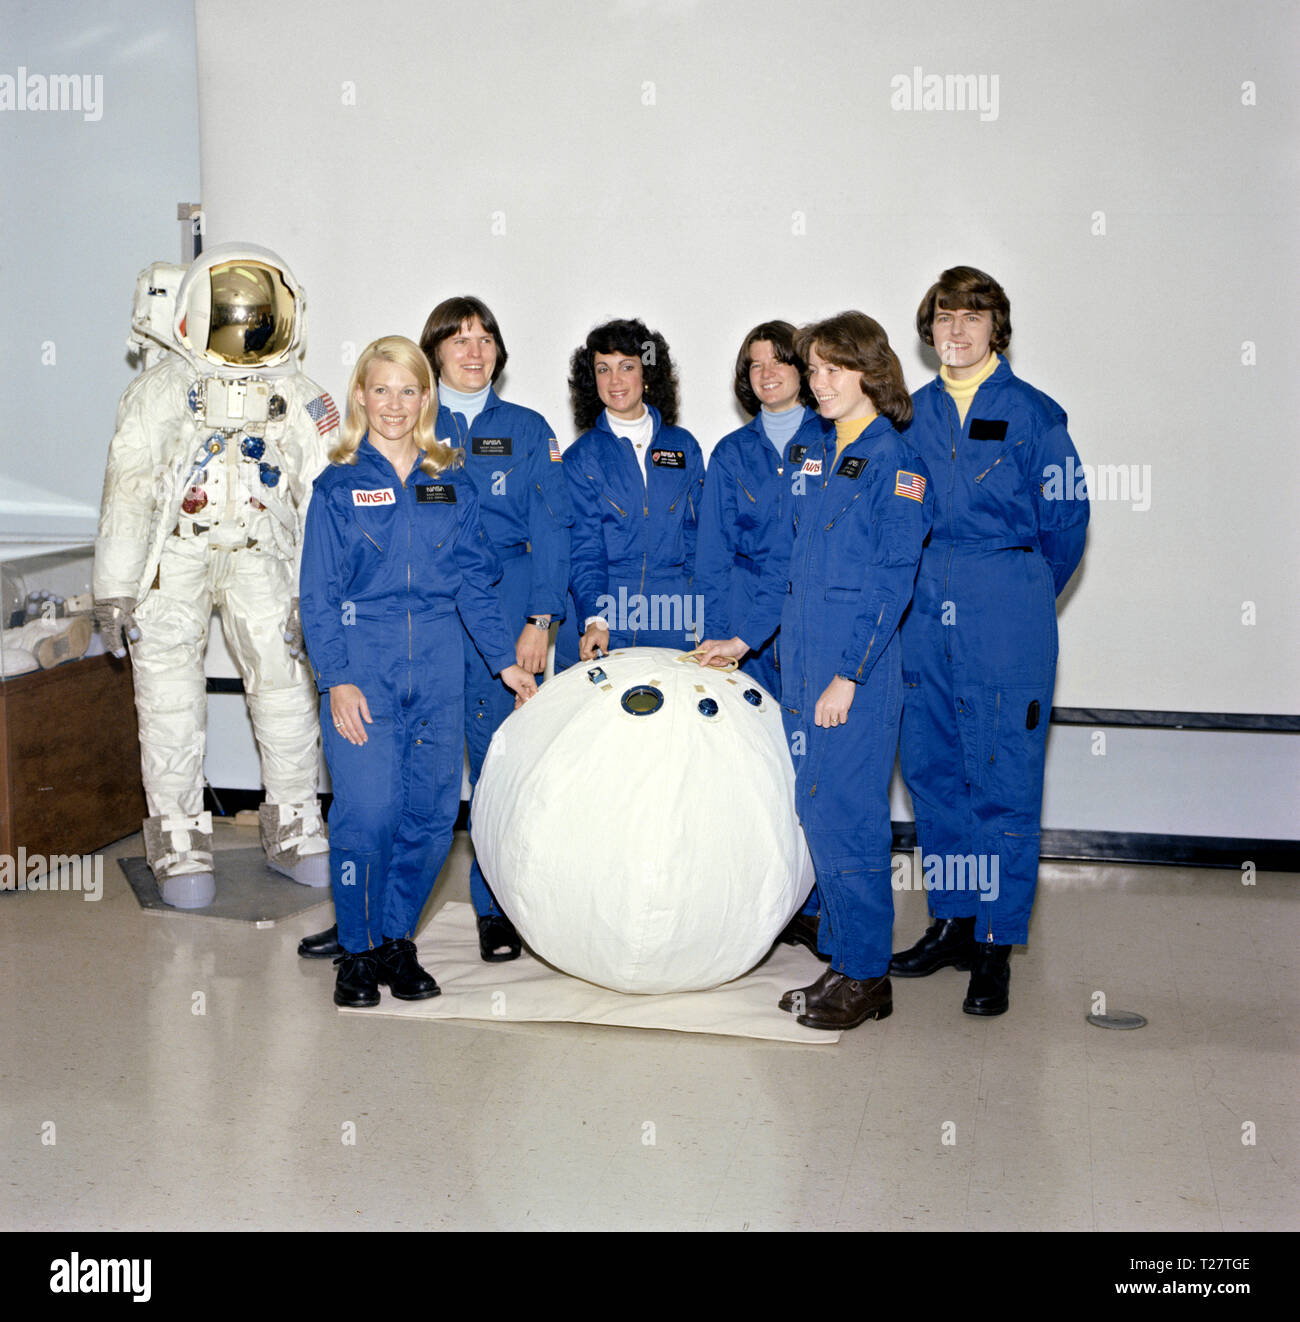 (28 Feb 1979) --- Sporting their new Shuttle-type constant-wear garments, these six astronaut candidates pose for a picture in the crew systems laboratory at the Johnson Space Center (JSC) with the personnel rescue enclosure (PRE) or 'rescue ball' and an unoccupied Apollo EMU.  From left to right are Rhea Seddon, Kathryn D. Sullivan,  Judith A. Resnik,  Sally K. Ride, Anna L. Fisher and Shannon W. Lucid. Stock Photo